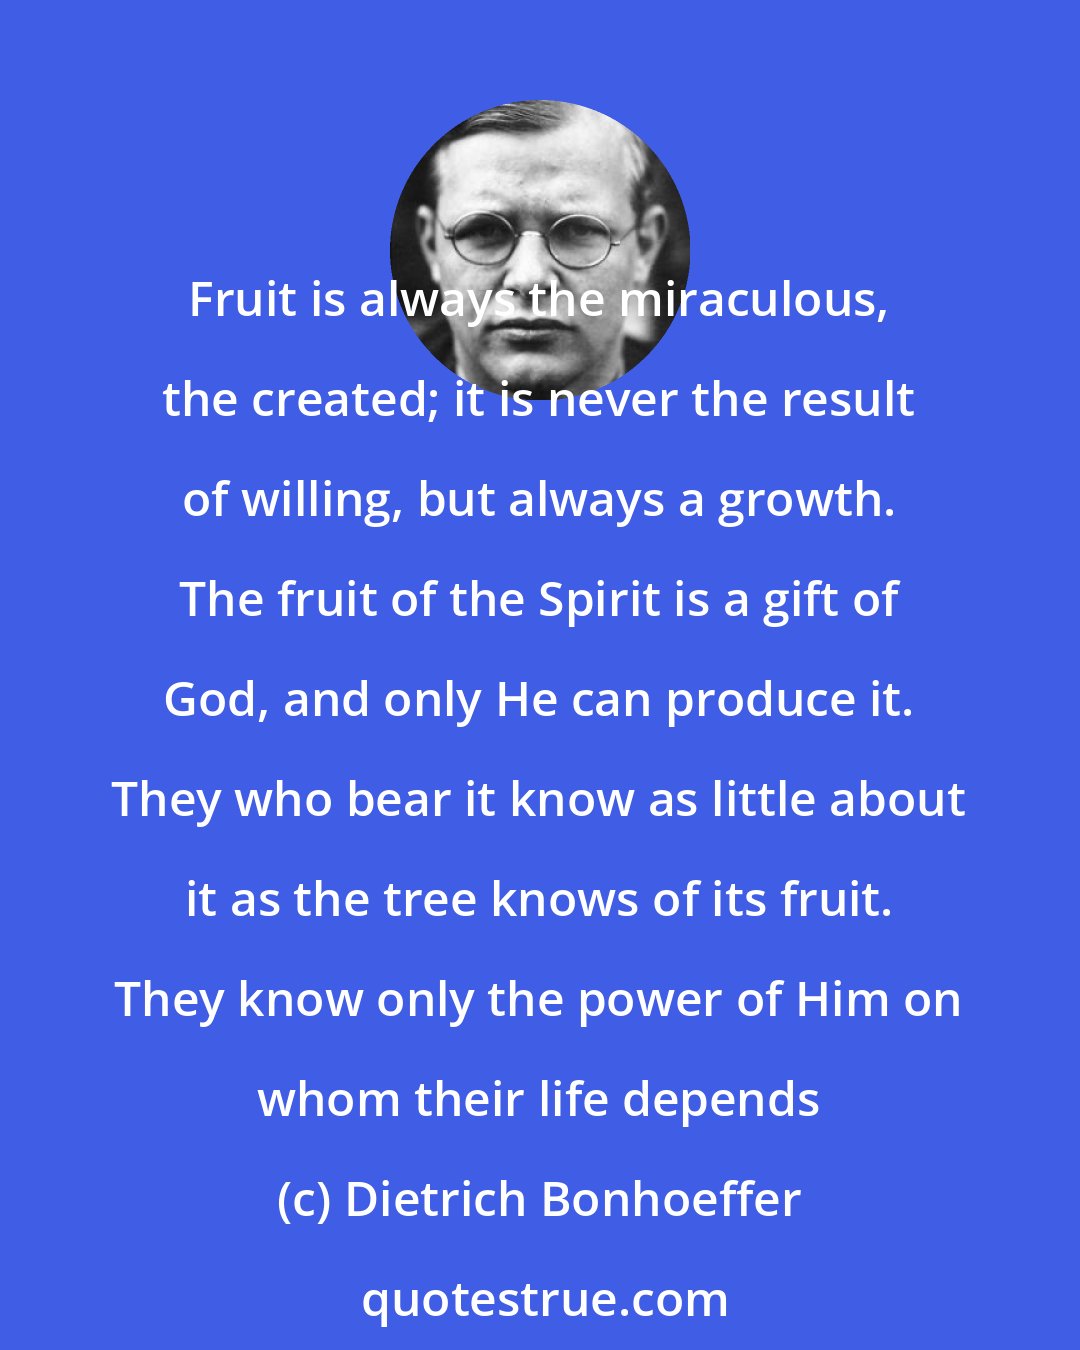 Dietrich Bonhoeffer: Fruit is always the miraculous, the created; it is never the result of willing, but always a growth. The fruit of the Spirit is a gift of God, and only He can produce it. They who bear it know as little about it as the tree knows of its fruit. They know only the power of Him on whom their life depends